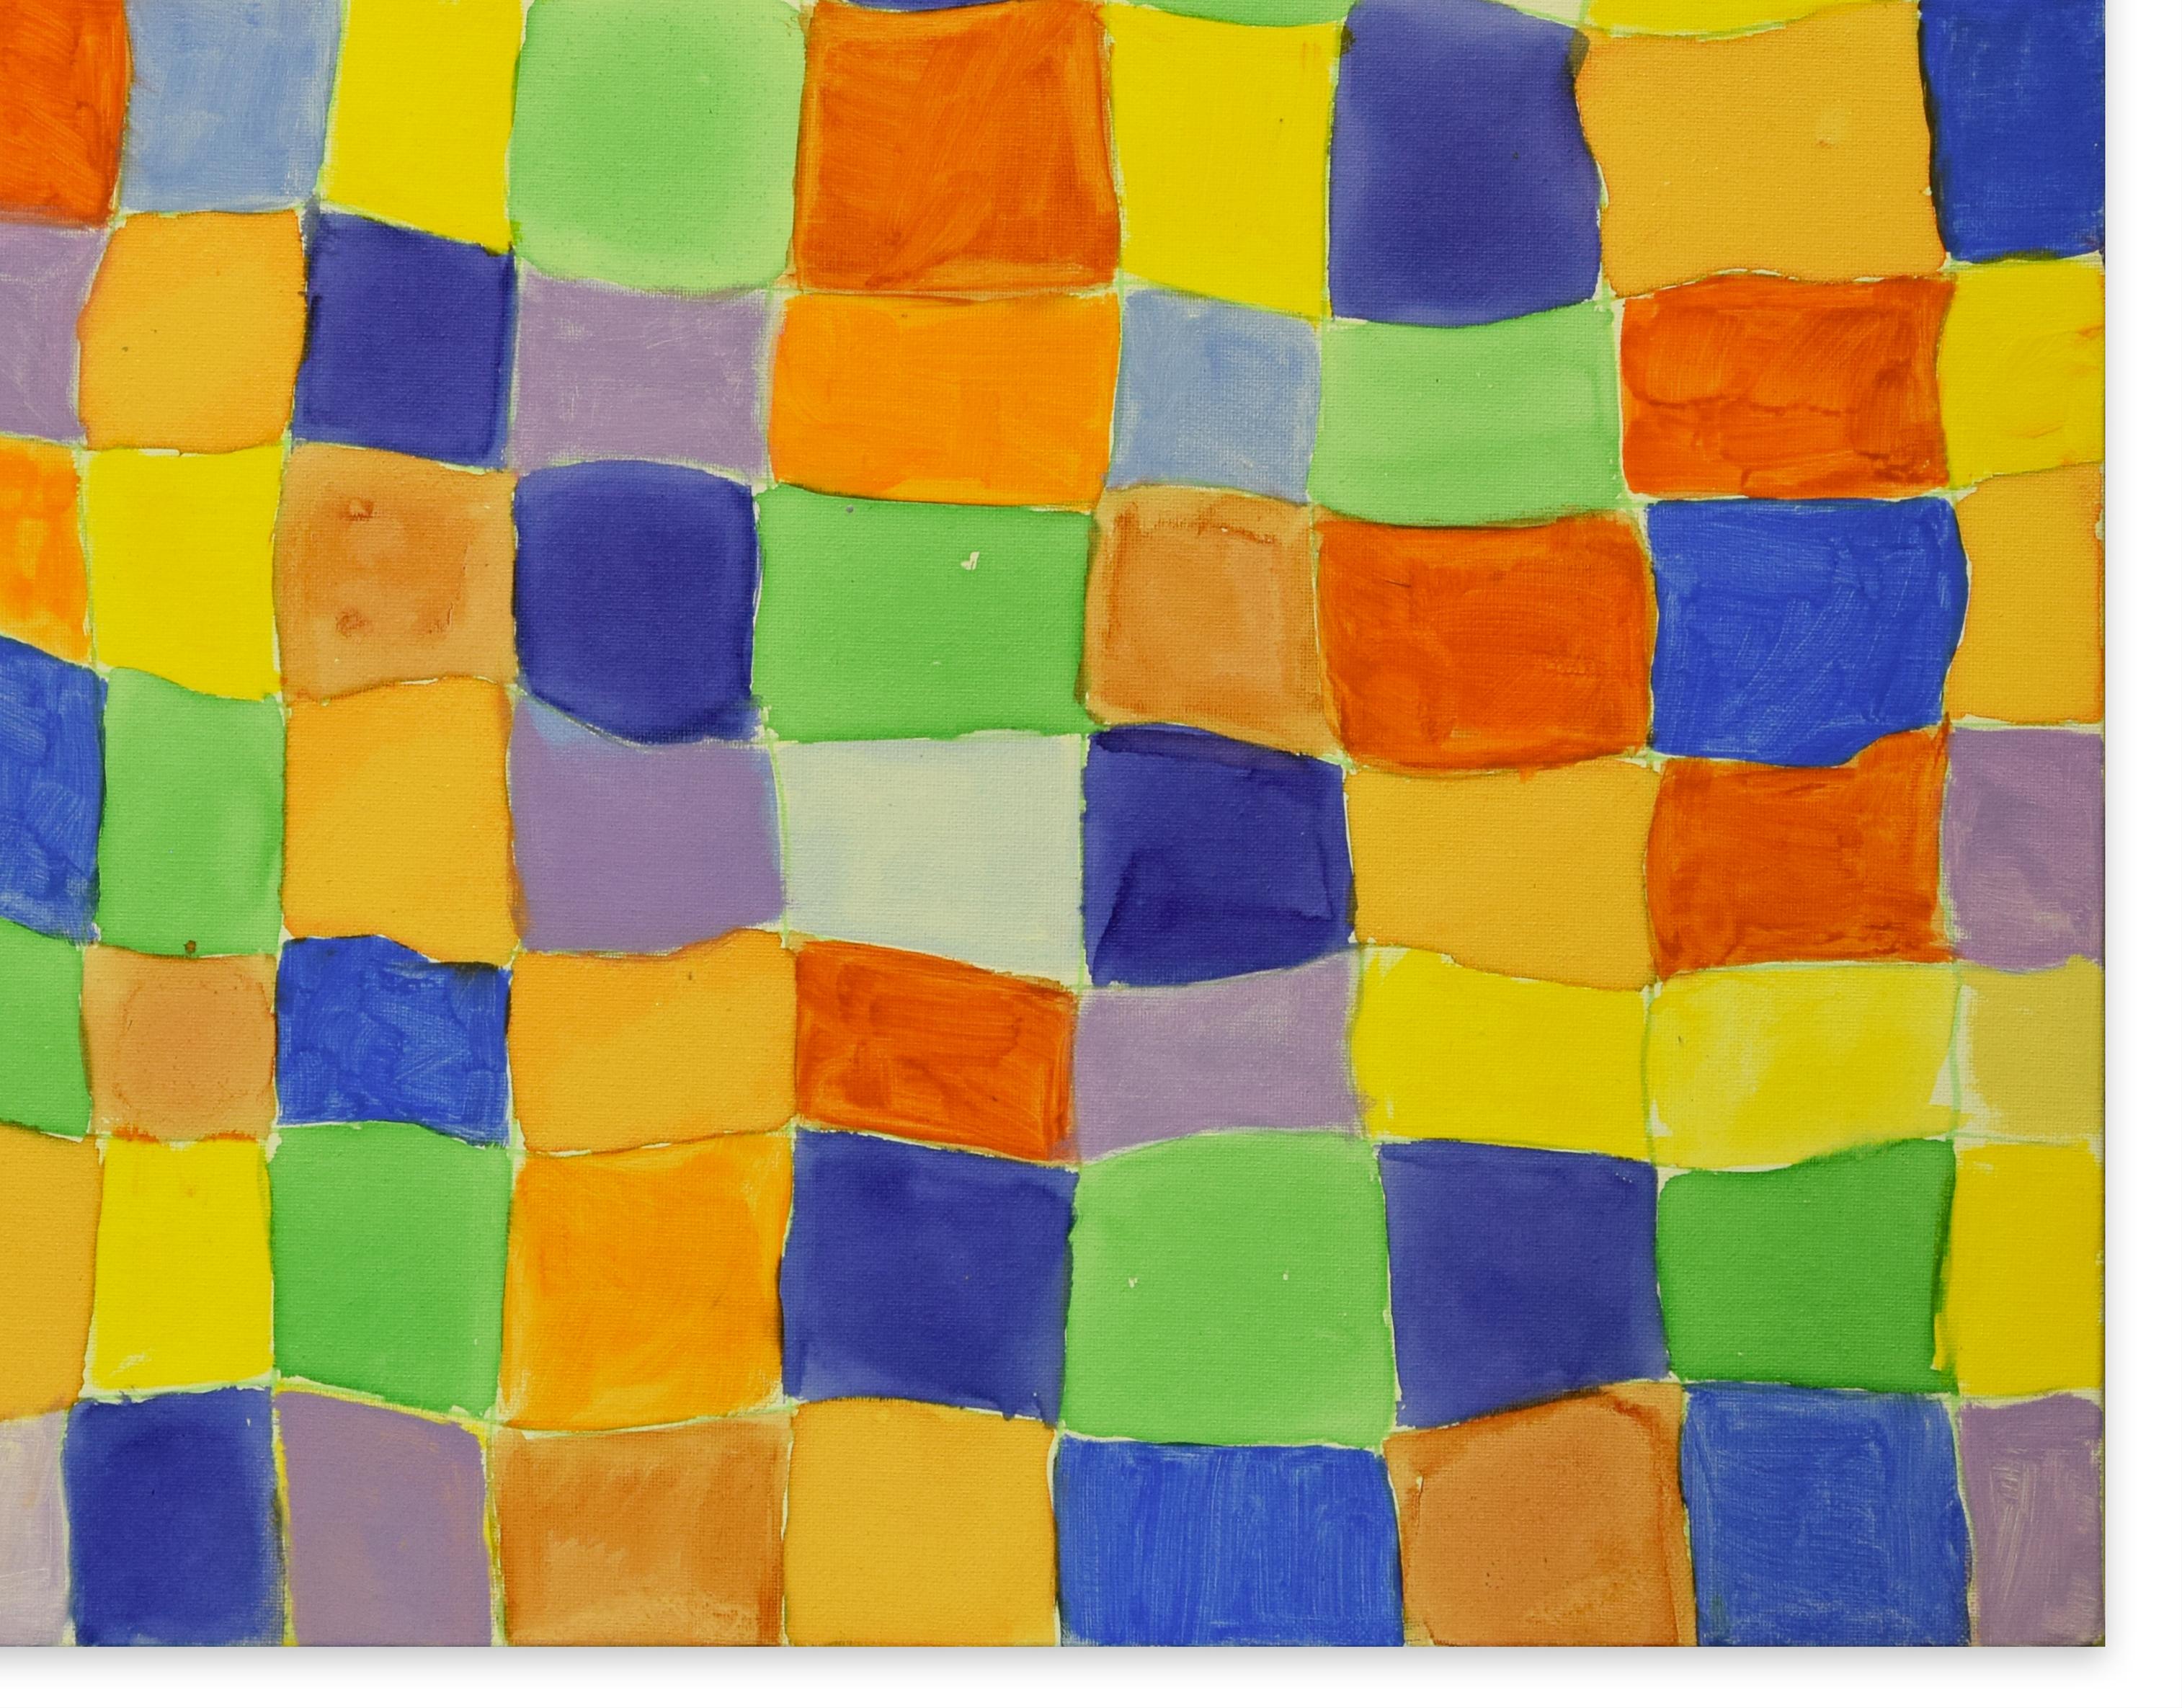 Reticulum is an artwork realized by Giorgio Lo Fermo in 2019.

Oil on canvas. Hand-signed by the artist on the back.

This painting is a beautiful example of contemporary abstract art. The composition consists of a very colorful lattice.

Giorgio Lo